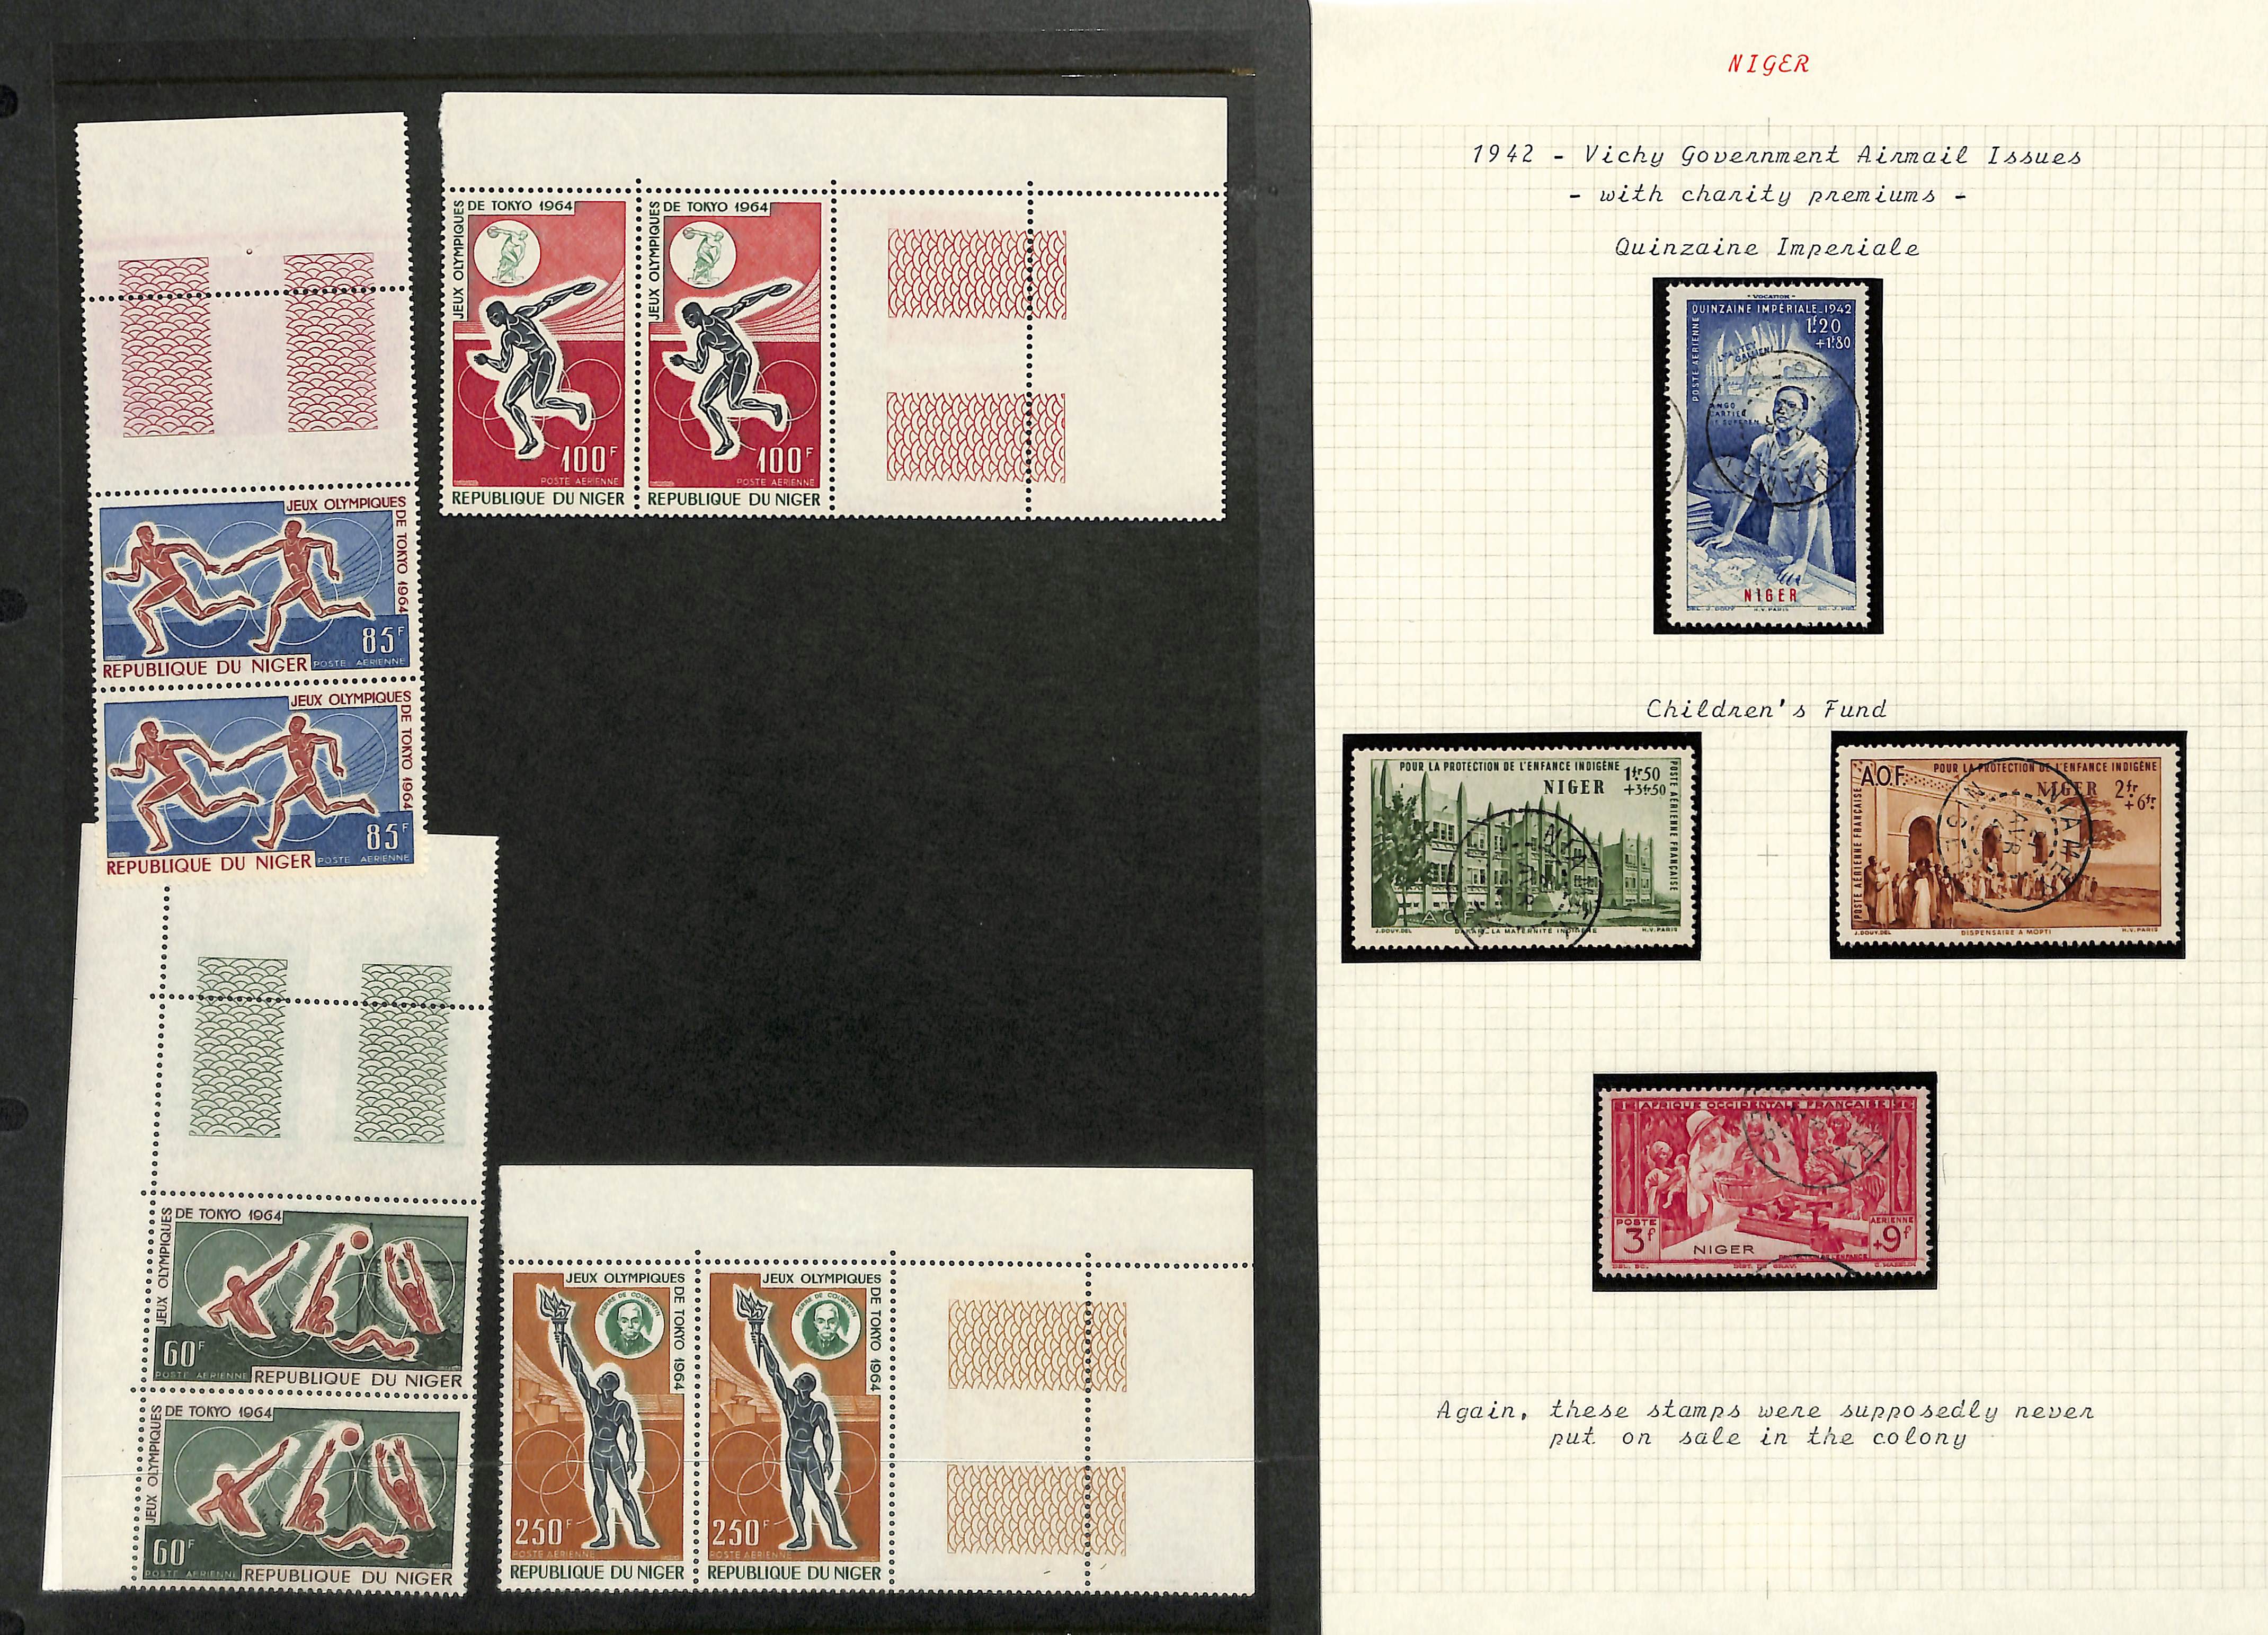 Niger. 1921 - c.1990 Mint and used collection with covers, die and plate proofs. (100s). - Image 16 of 26